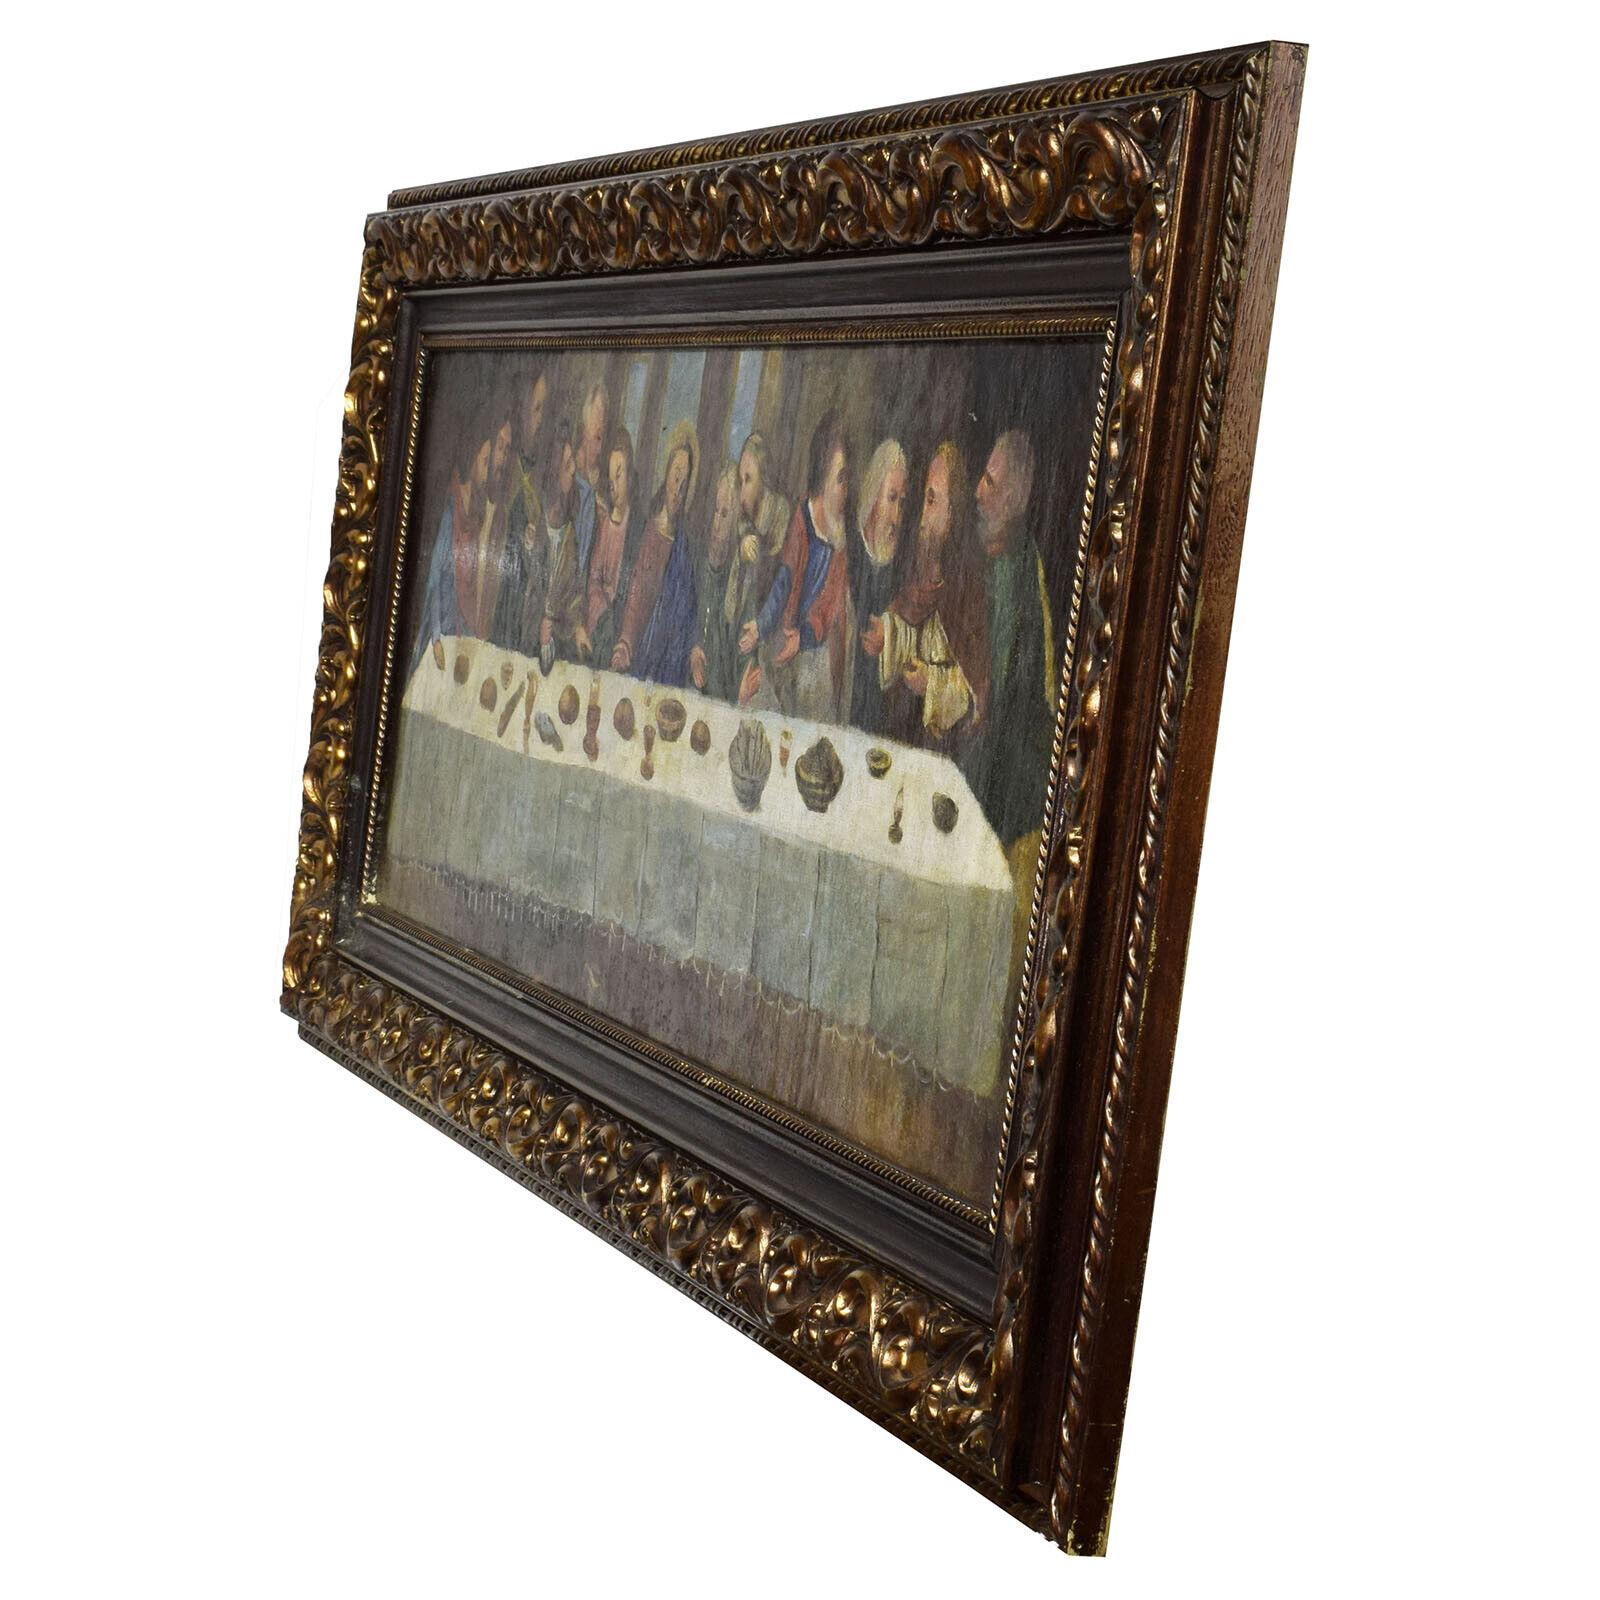 Step back in time with this remarkable 19th-century antique painting titled 